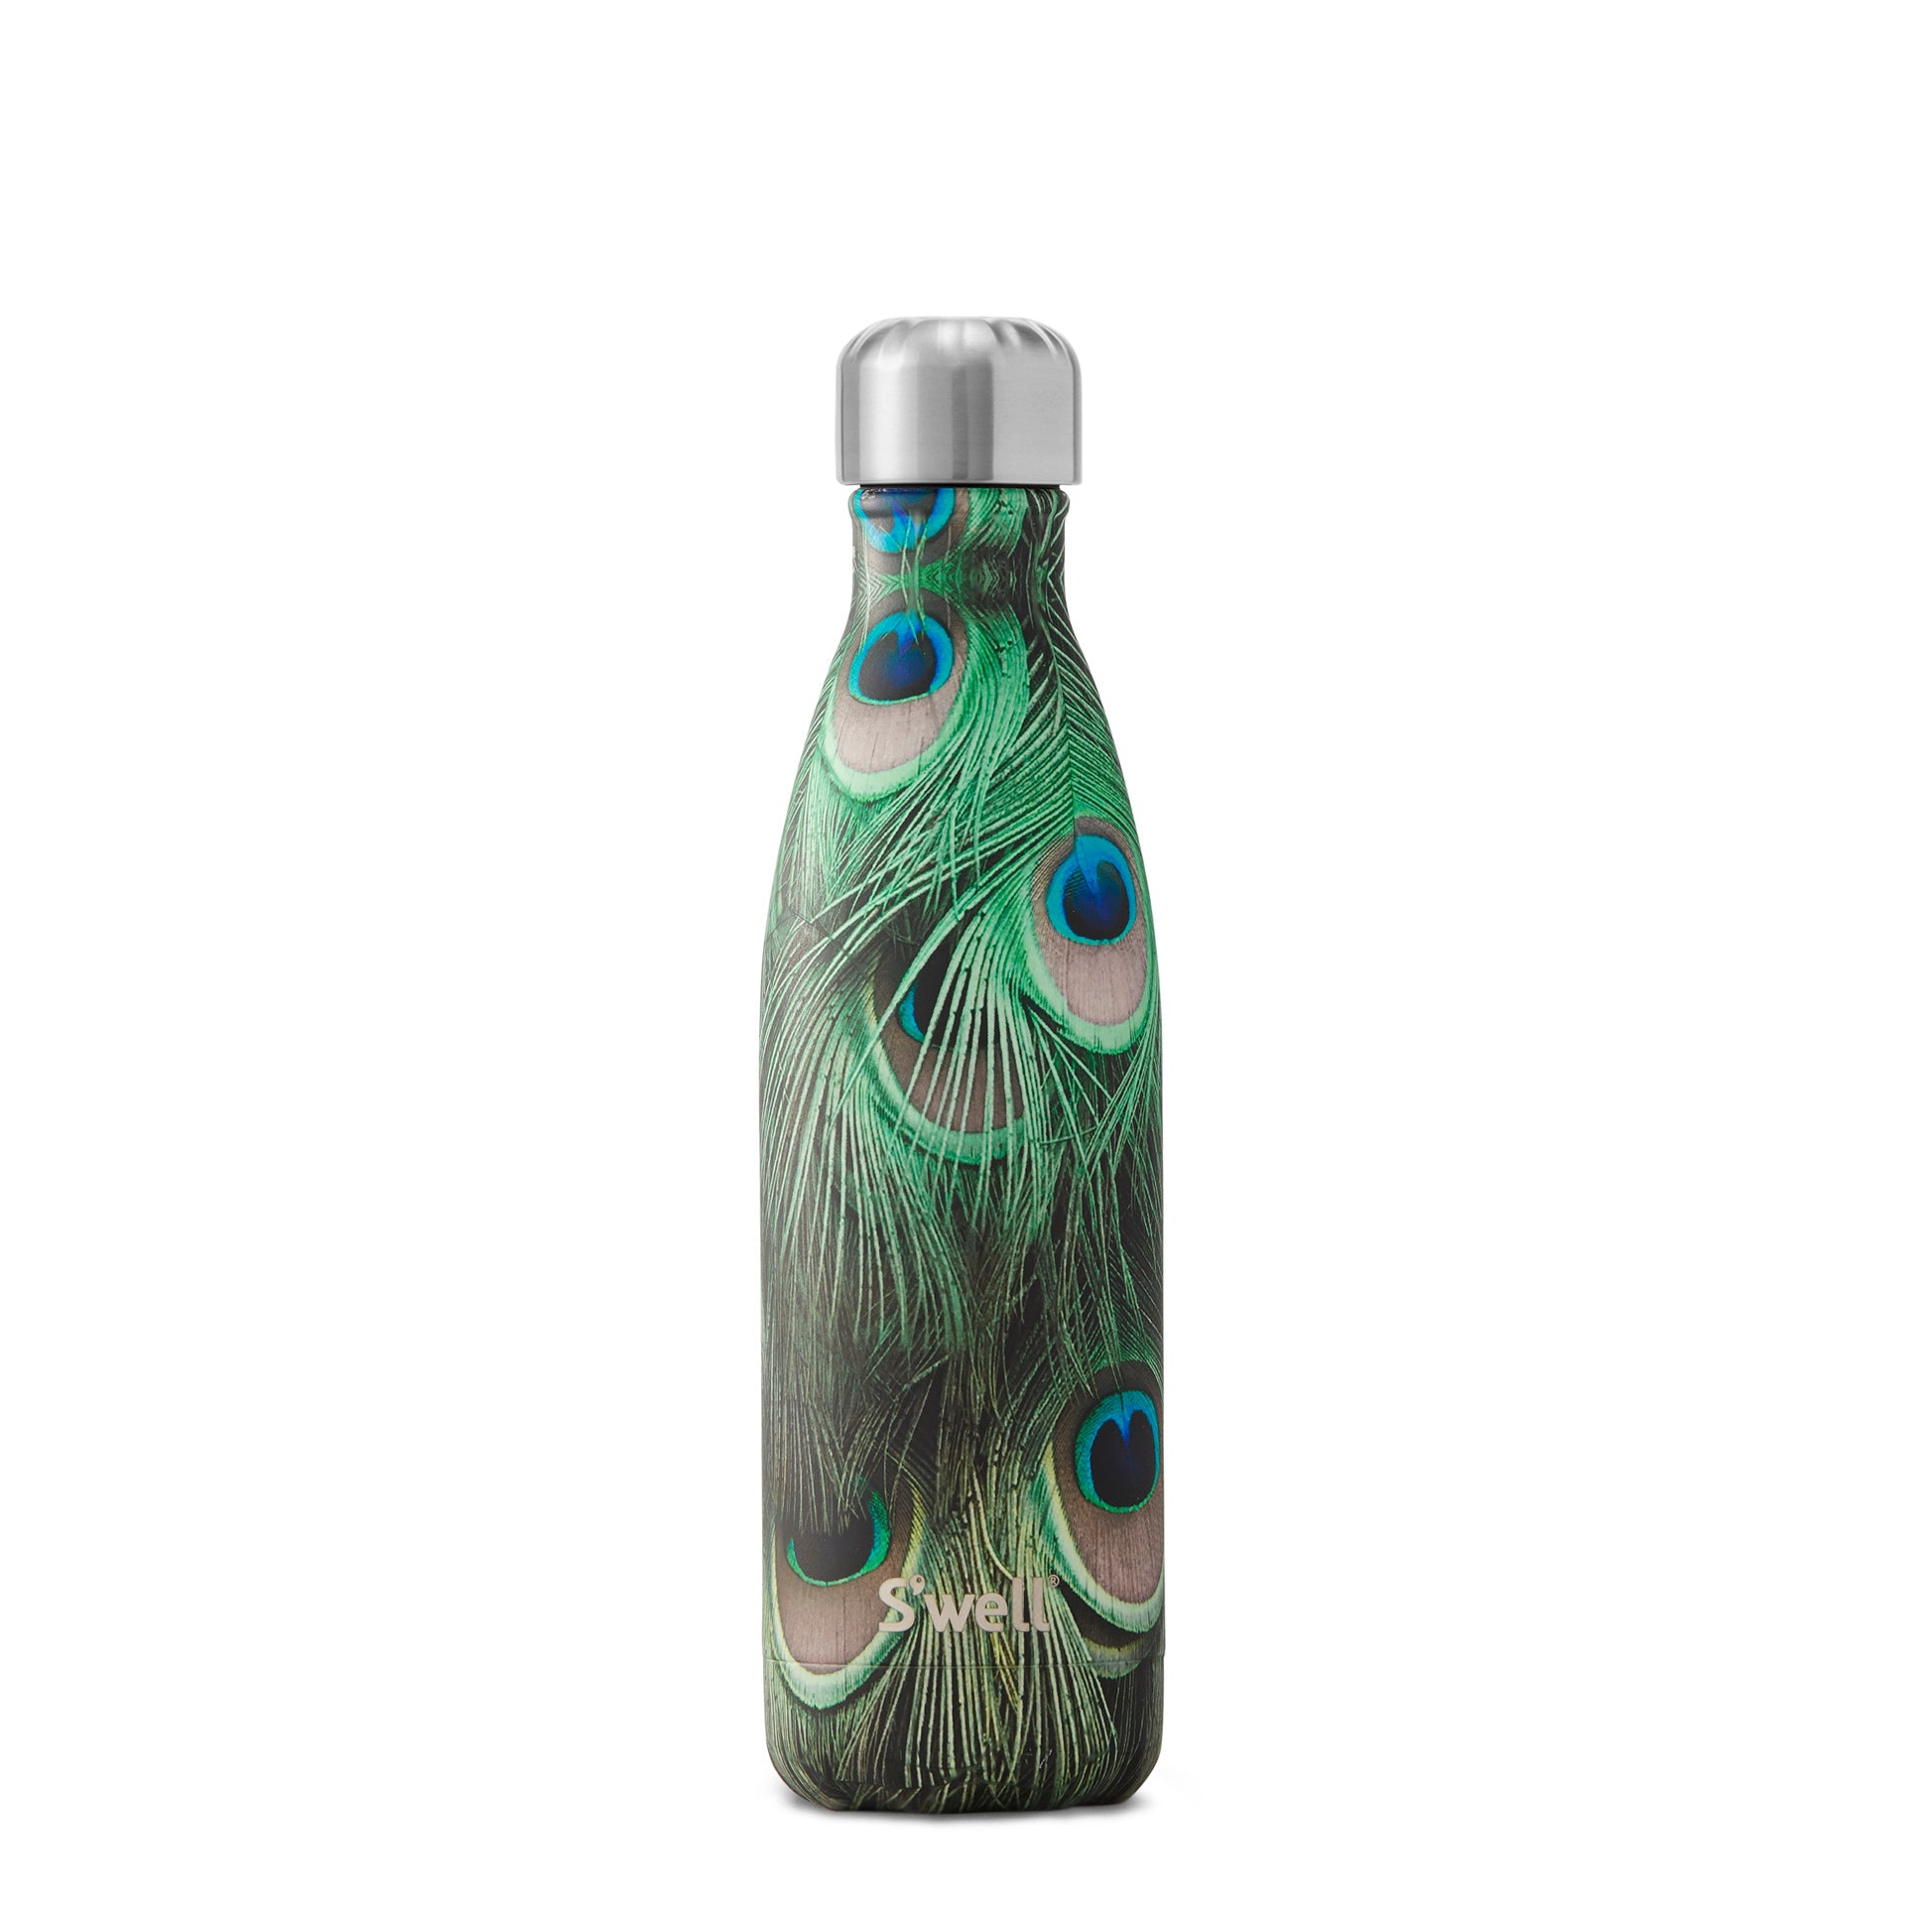 S'well water bottle in peacock print